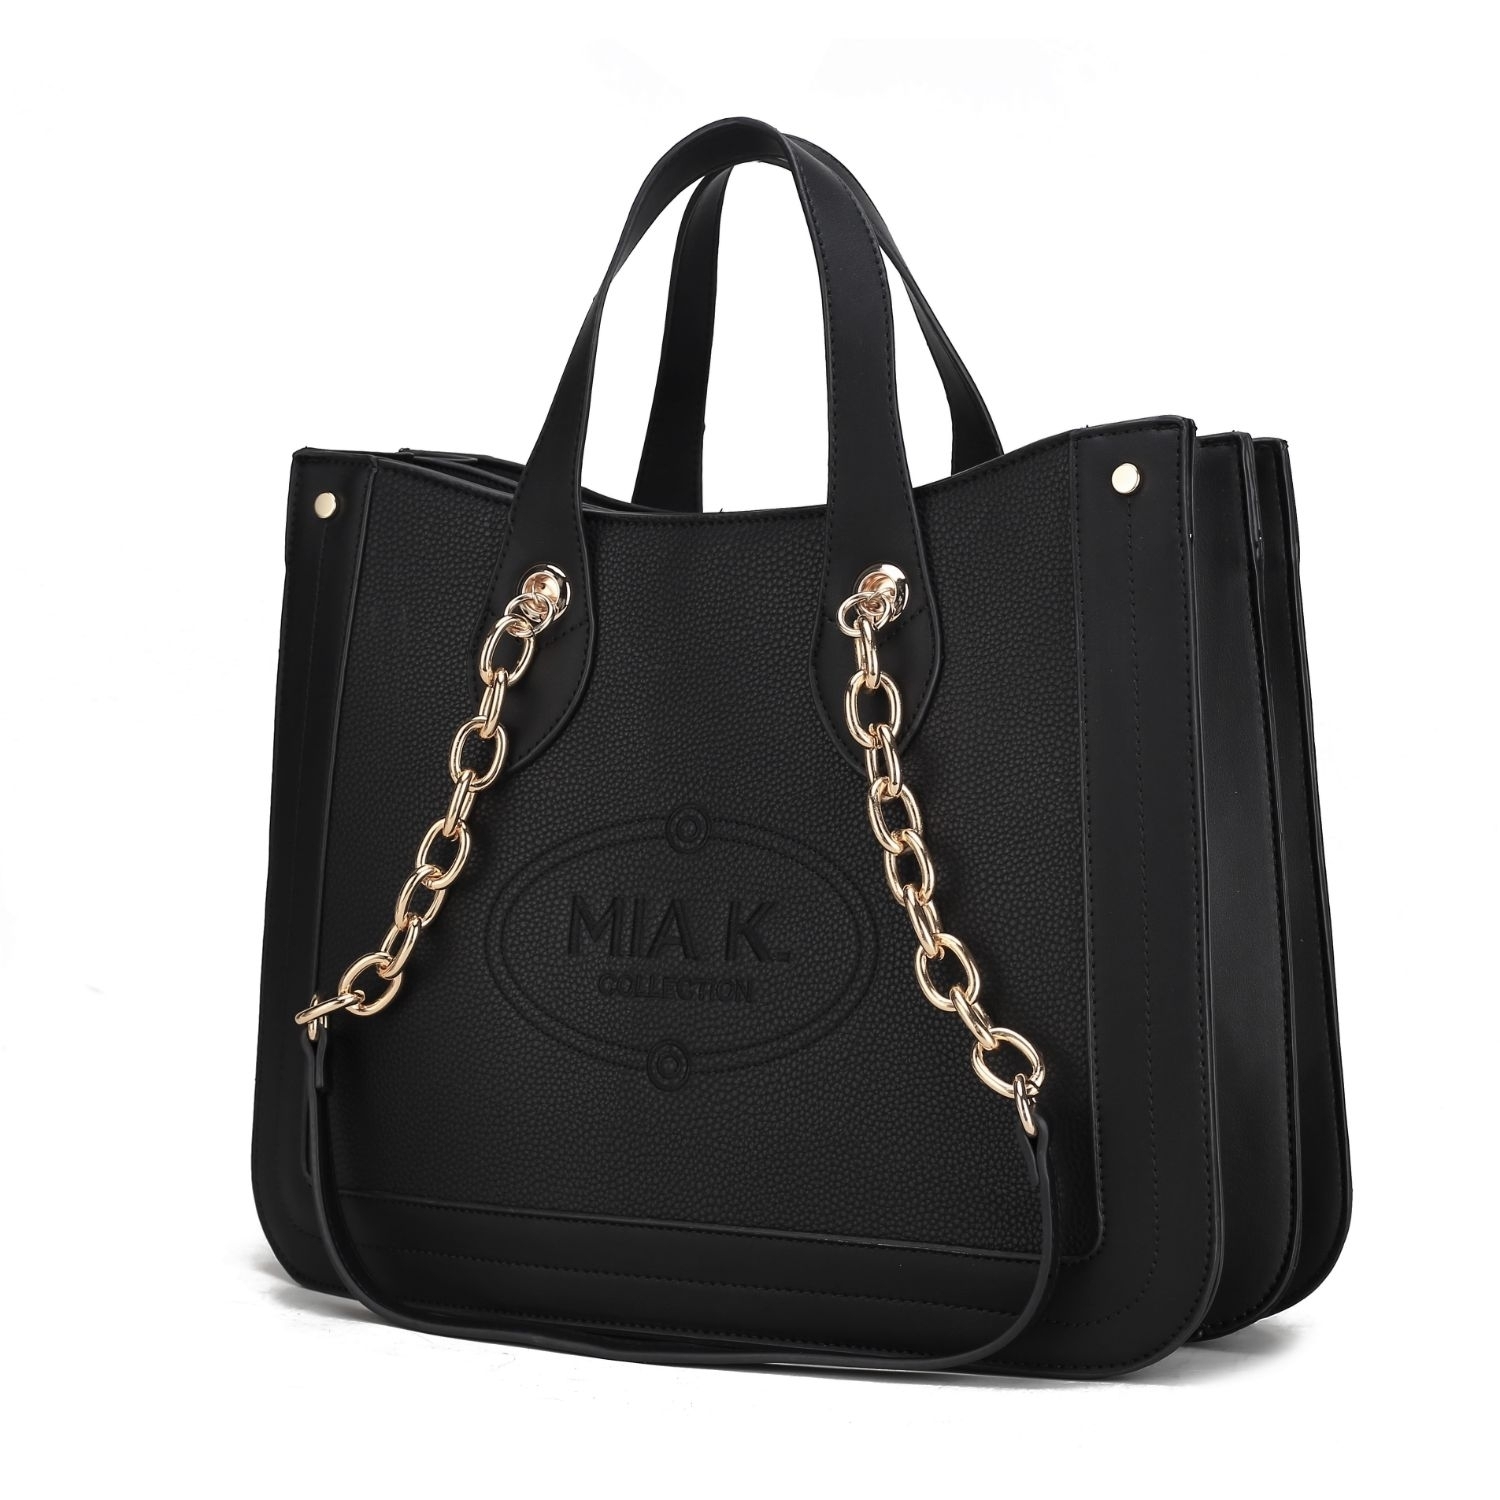 MKF Collection Stella Vegan Leather Women's Handbag Double Compartment Oversize Classy Tote By Mia K. - Olive